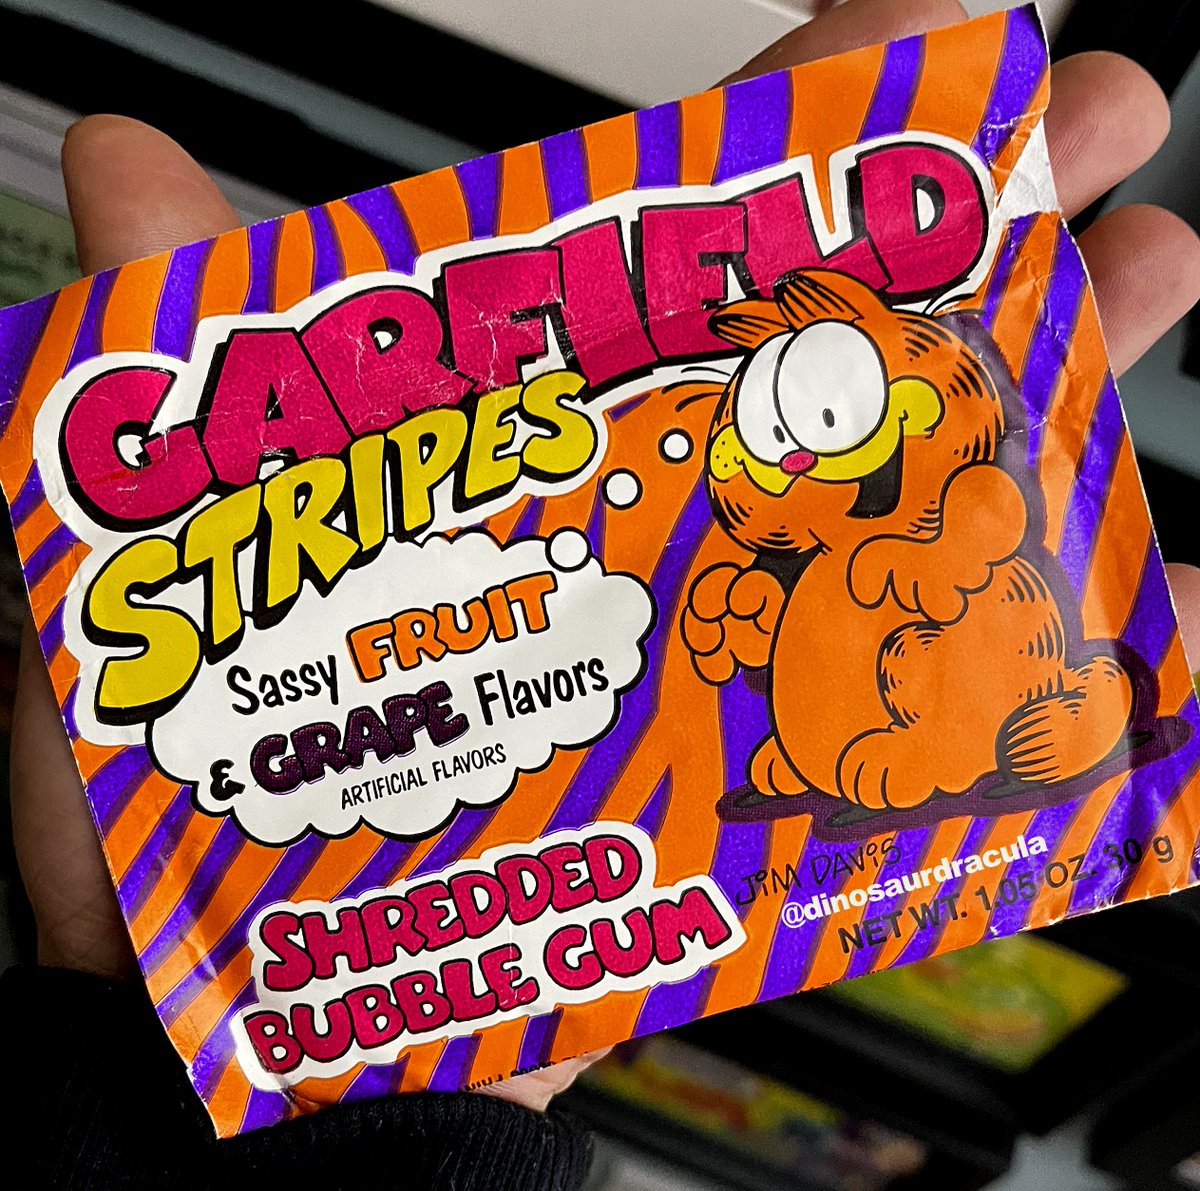 Garfield Stripes shredded gum, from 1989. Package looks like a pair of Zubaz. Note how we've also separated grapes from the (sassy) fruit family. A++.